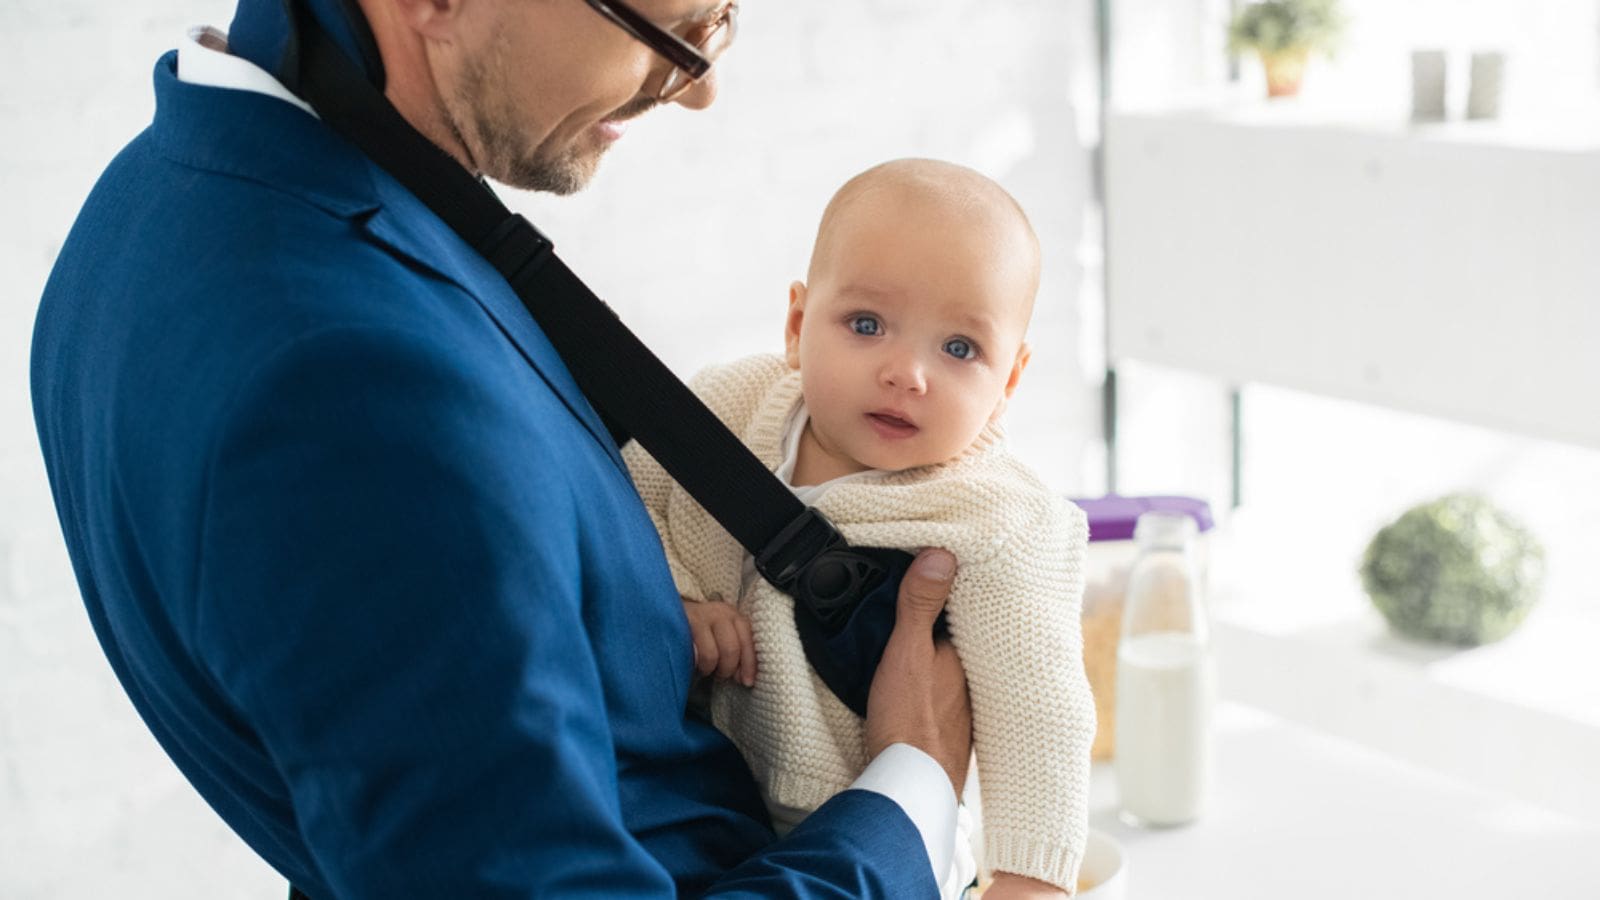 Infant daughter in babycarrier with father in suit